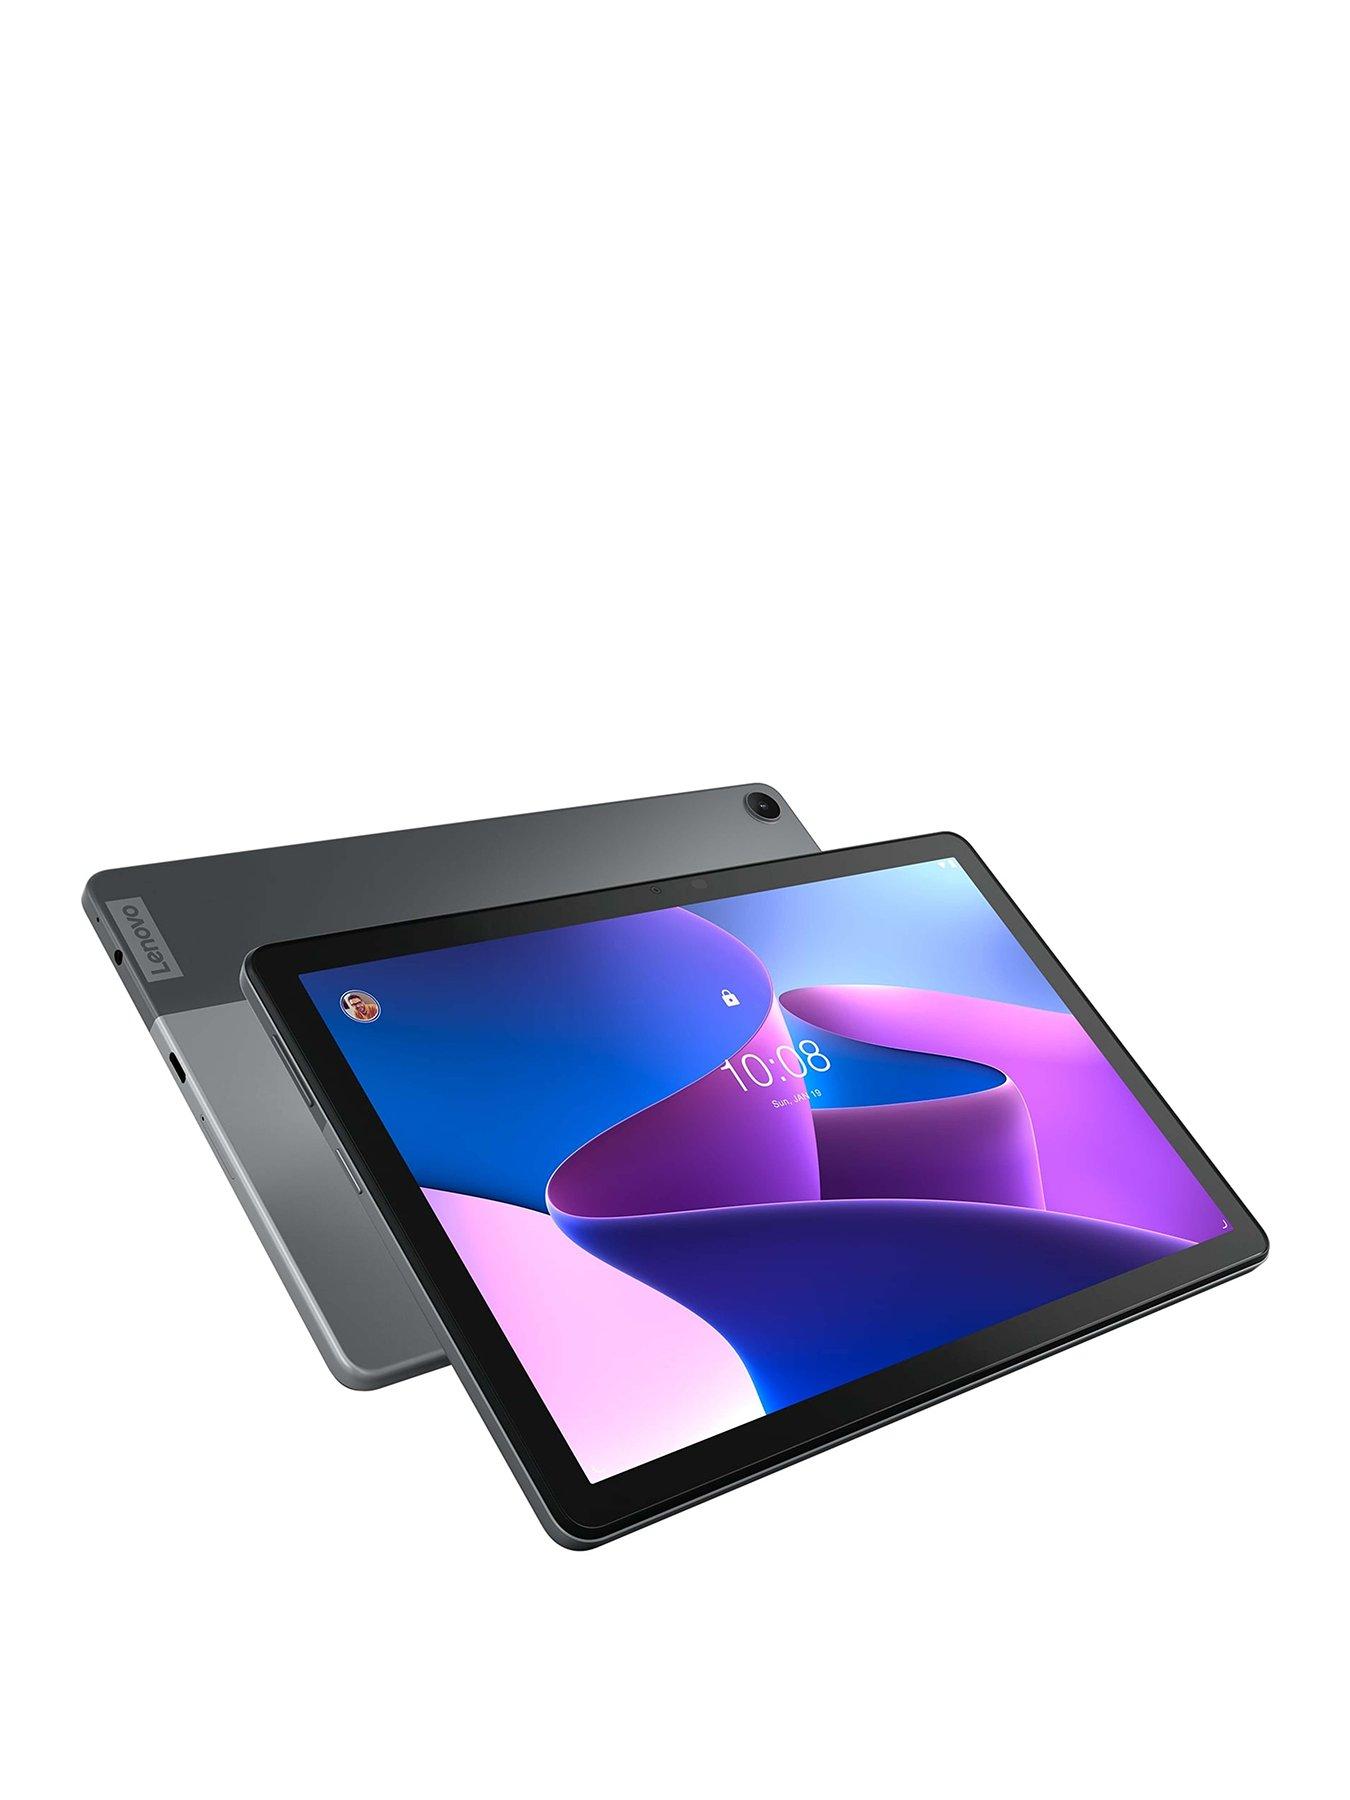 Lenovo Tab M8 Tablet, 8'' HD IPS Display, Android 11, Quad-Core Processor,  3GB Ram, 32GB Storage, Long Battery Life, SD Card Slot, , w Accessories